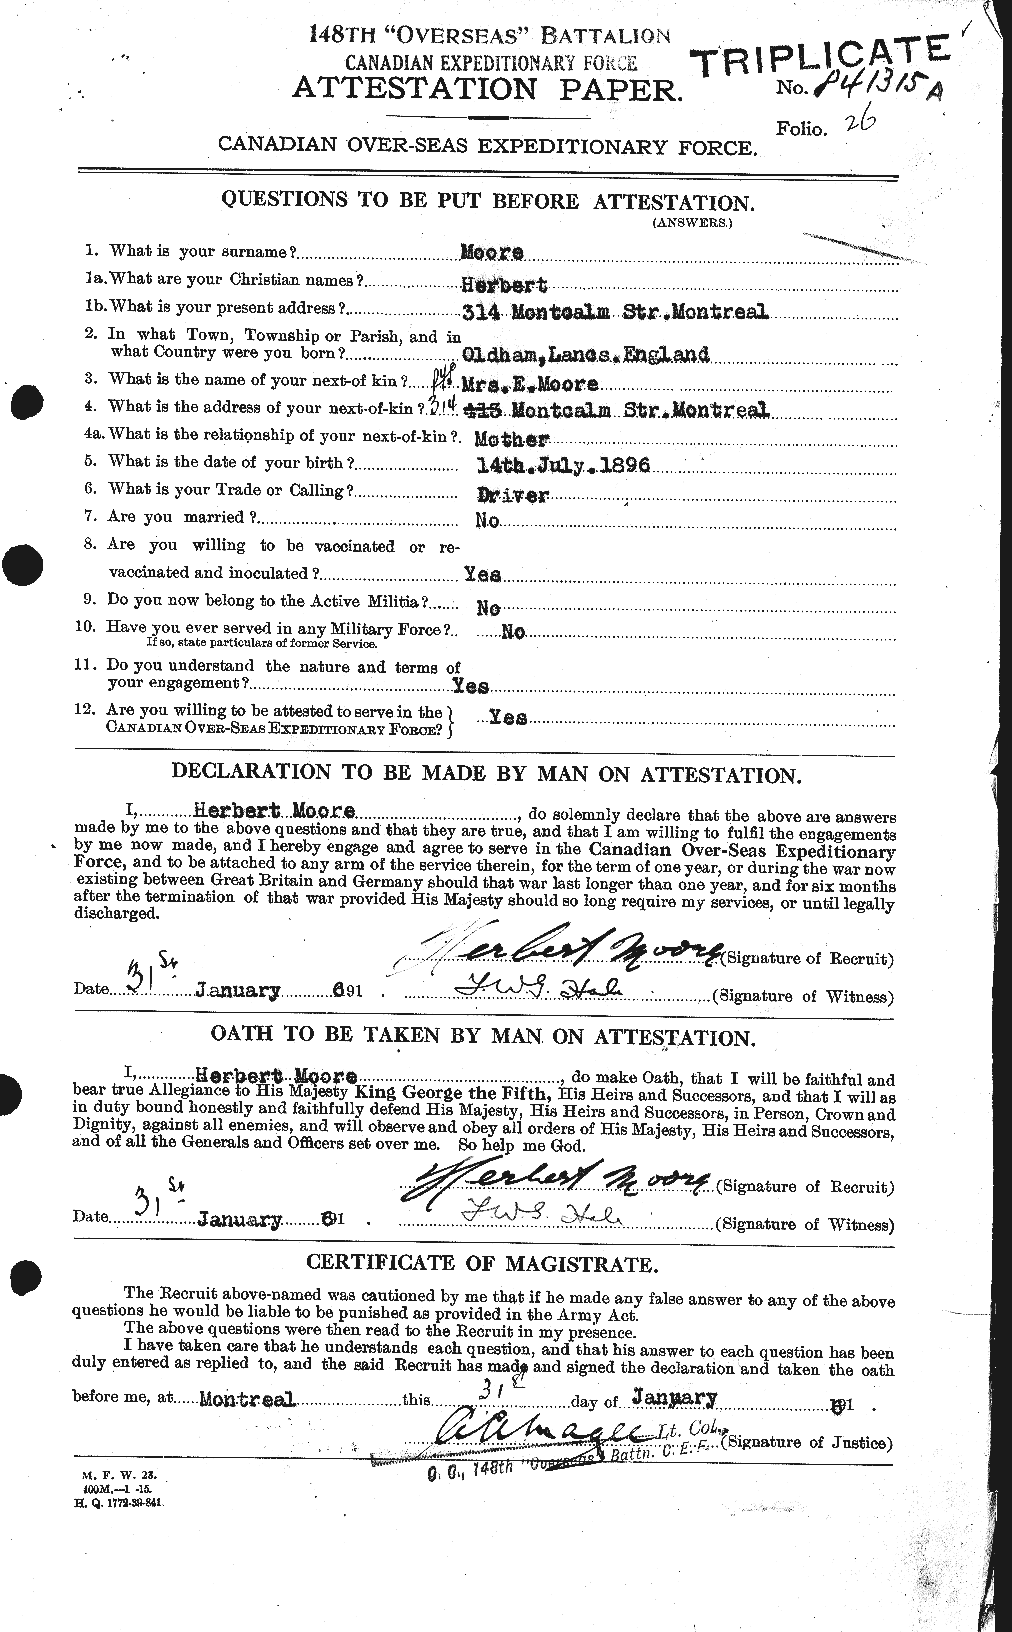 Personnel Records of the First World War - CEF 502111a